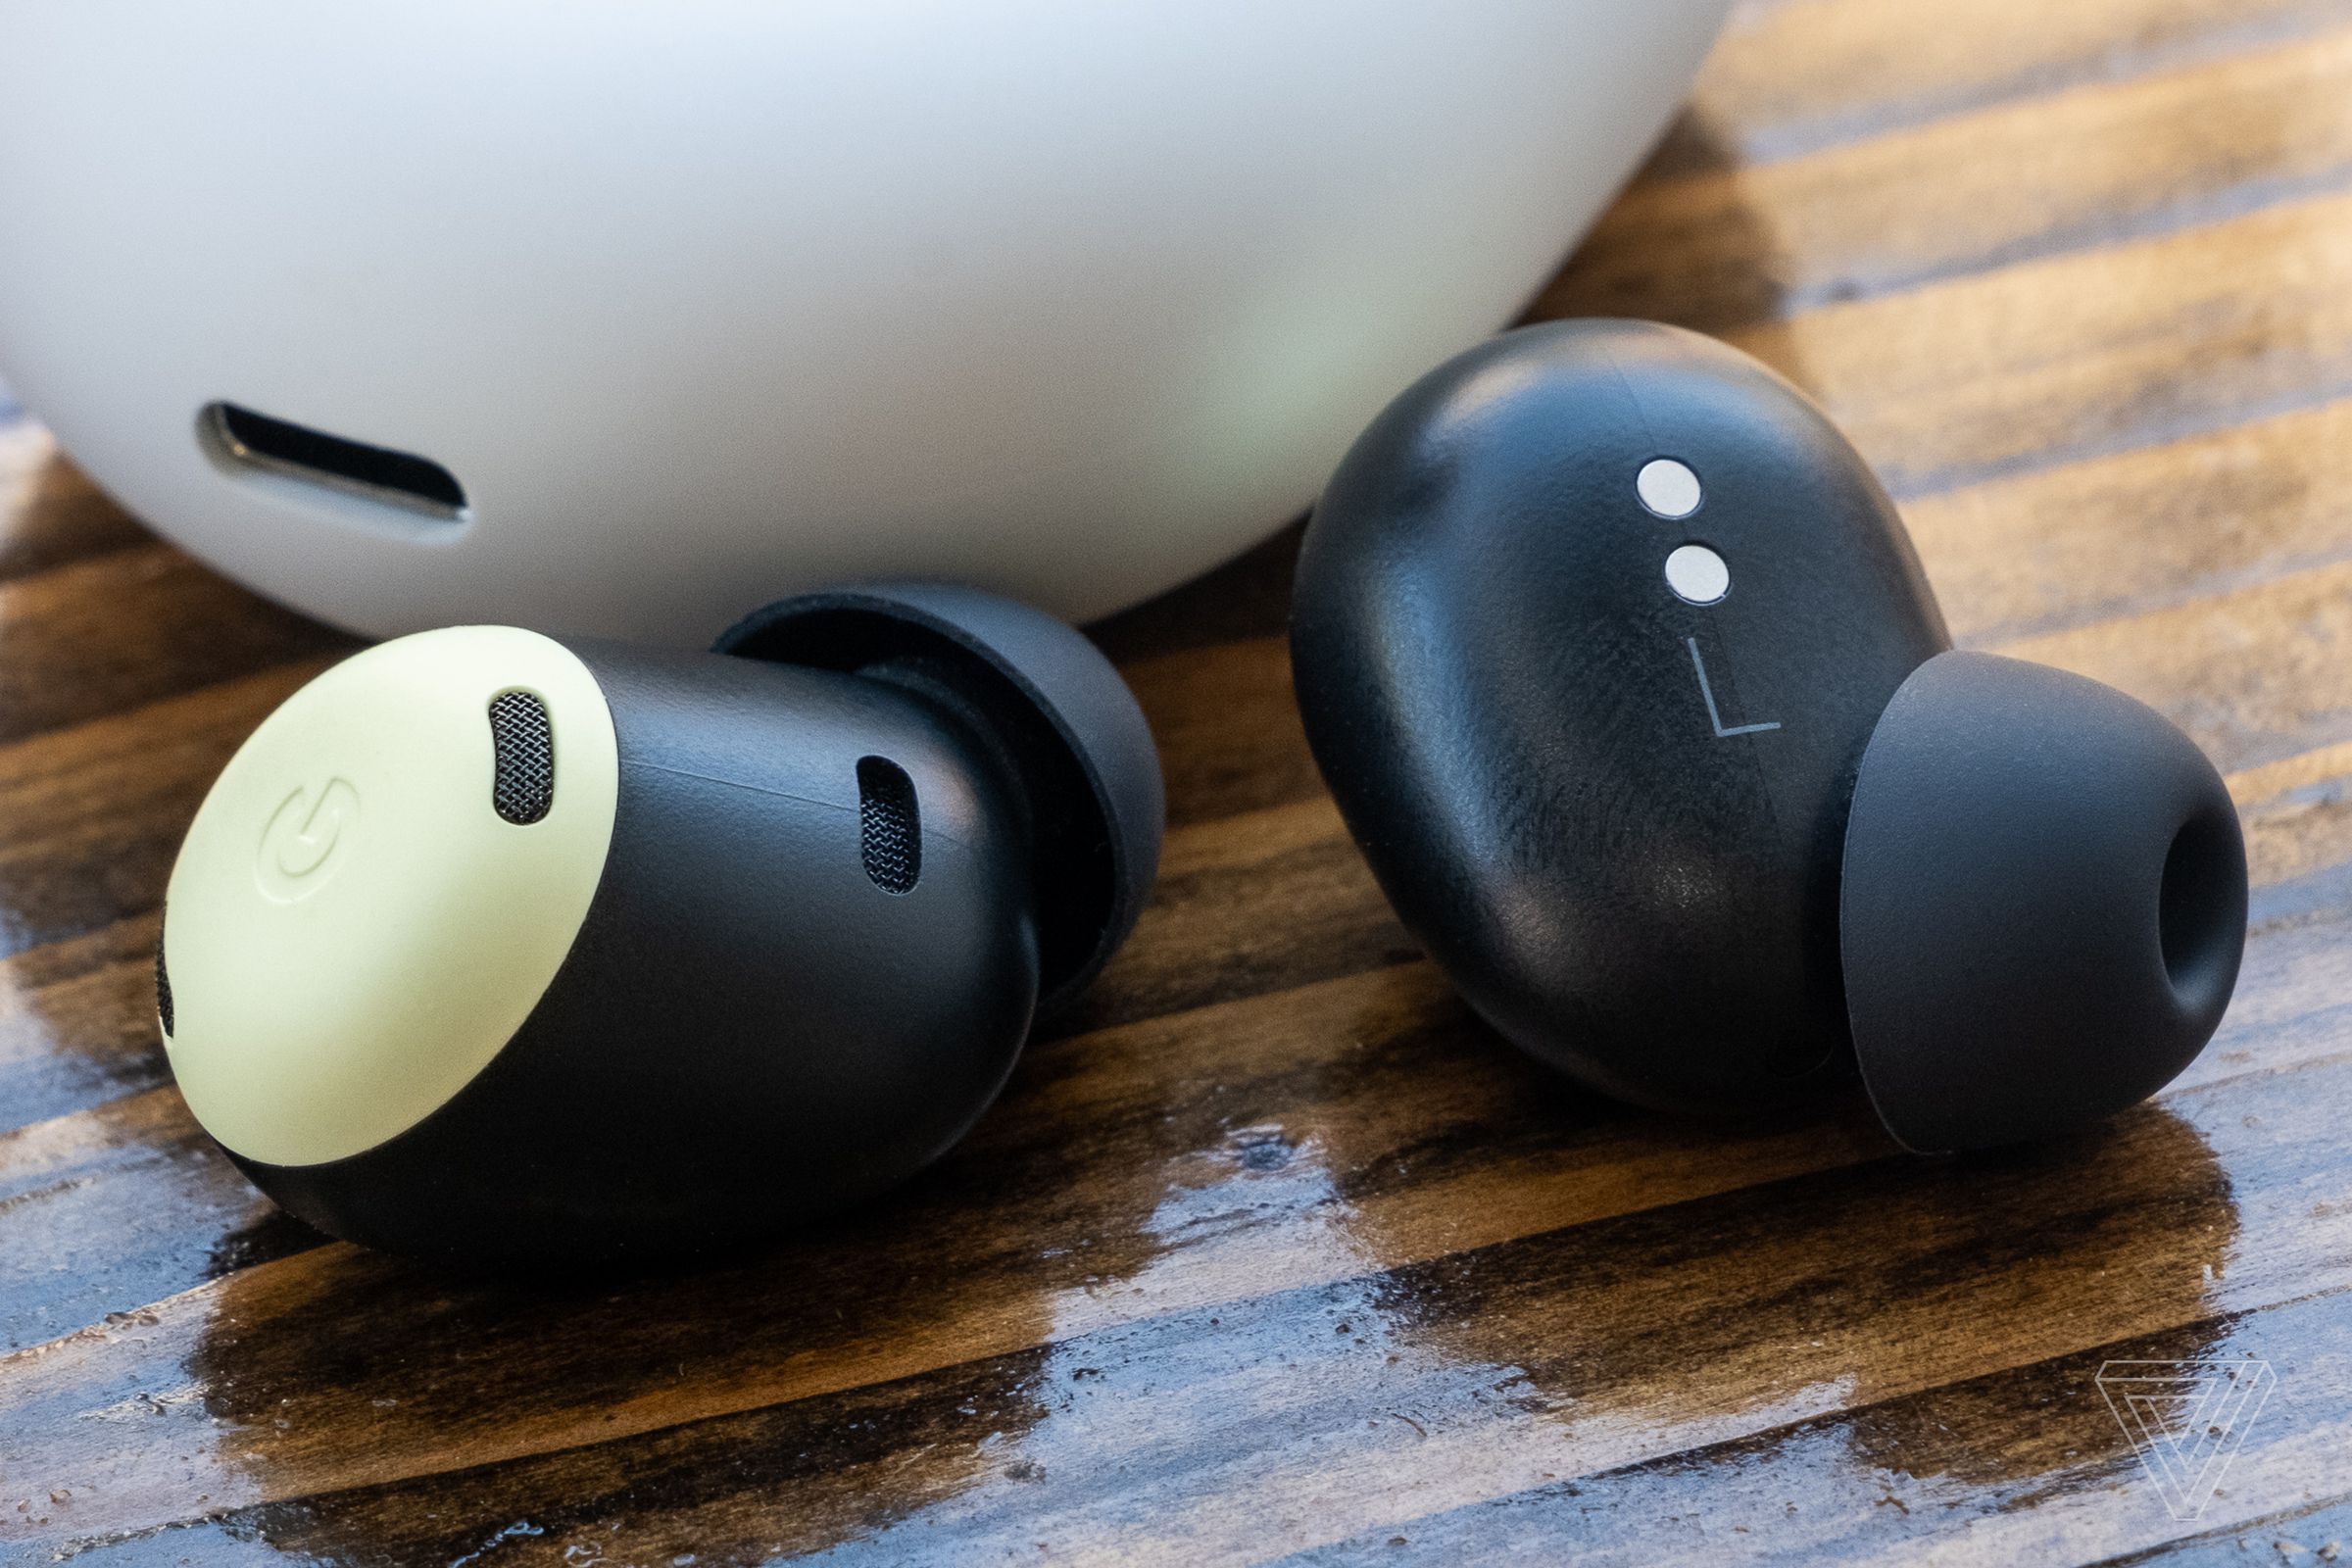 A close-up shot of the Pixel Buds Pro.